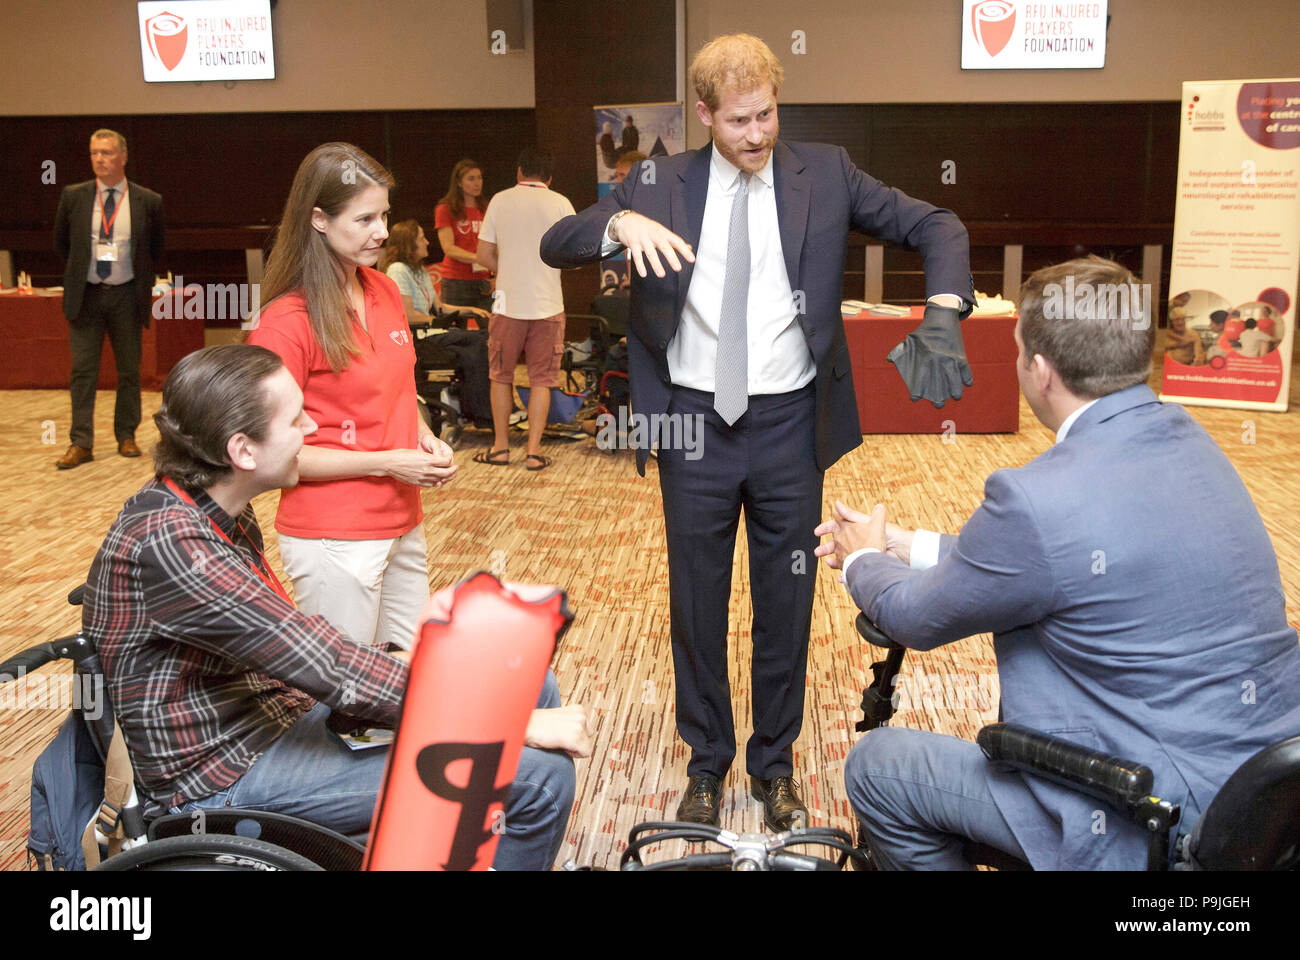 The Duke of Sussex with Karen Hood, head of the Injured Players Foundation (IPF), tries a diving glove as he meets scuba divers Tom Horay (left) and Tom Hugues who plan to teach diving to (IPF) members, during a visit to the RFU Injured Players Foundation's annual Client Forum at Twickenham Stadium, in London. Stock Photo